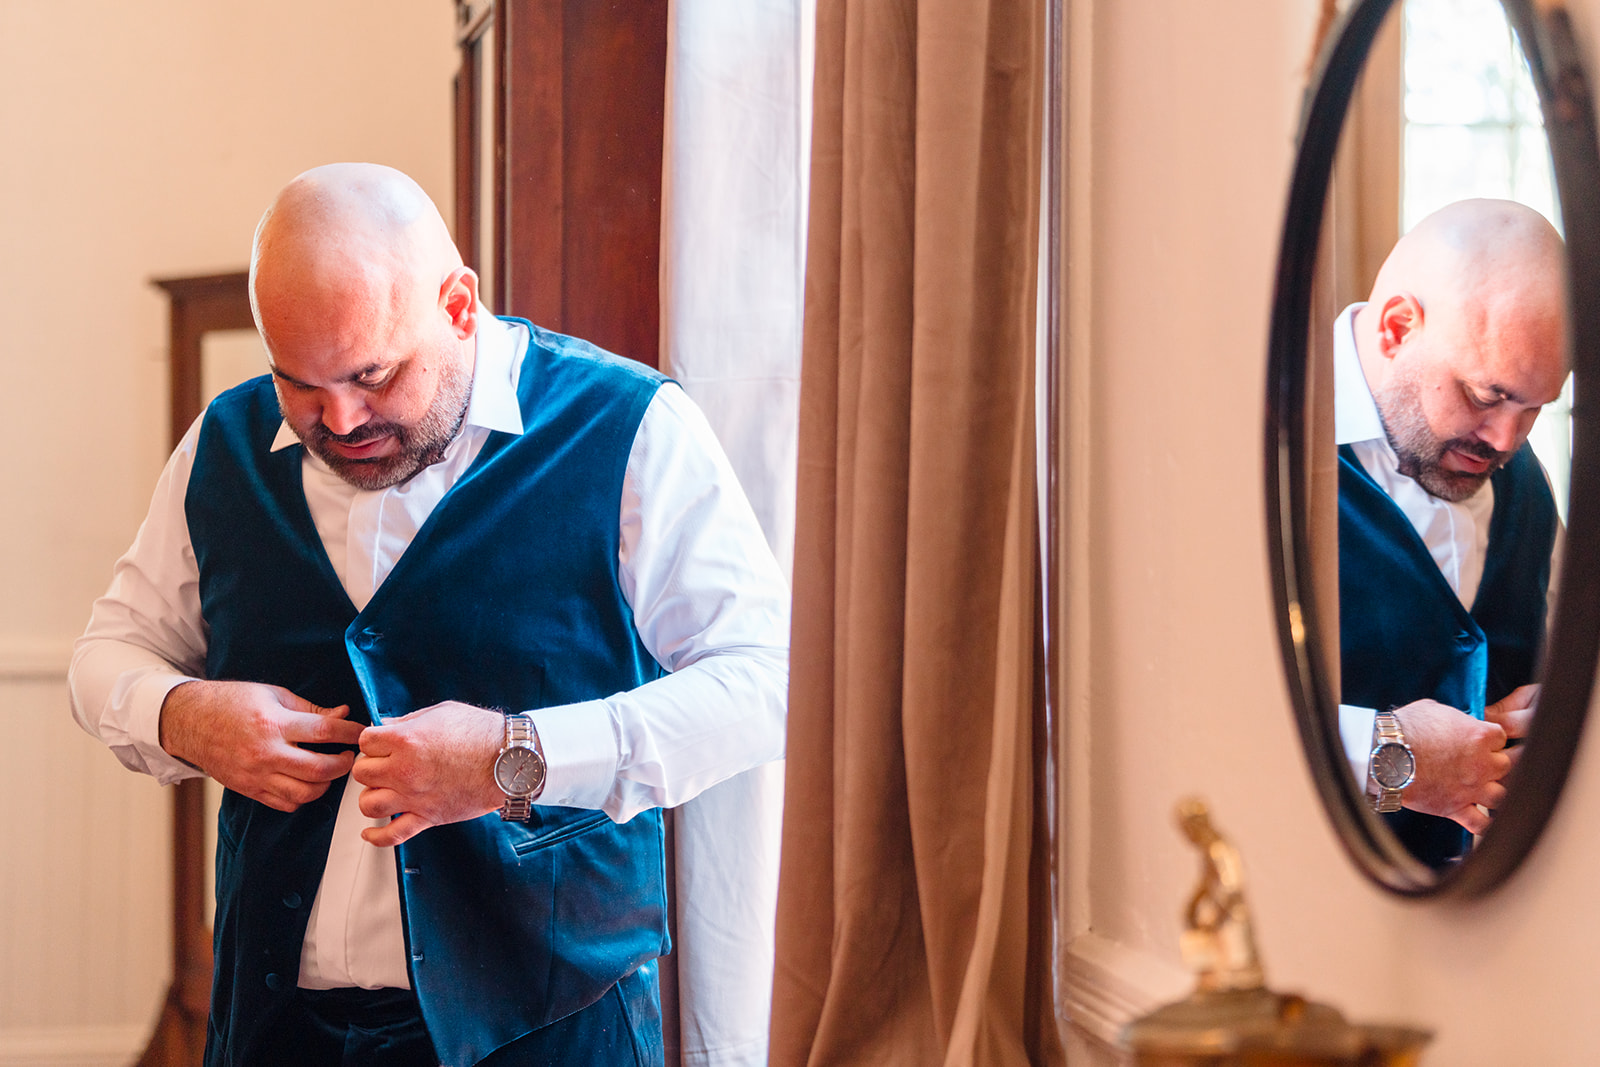 Pre-wedding moment: Alberto buttoning his vest in preparation for his big day at Venue 1902